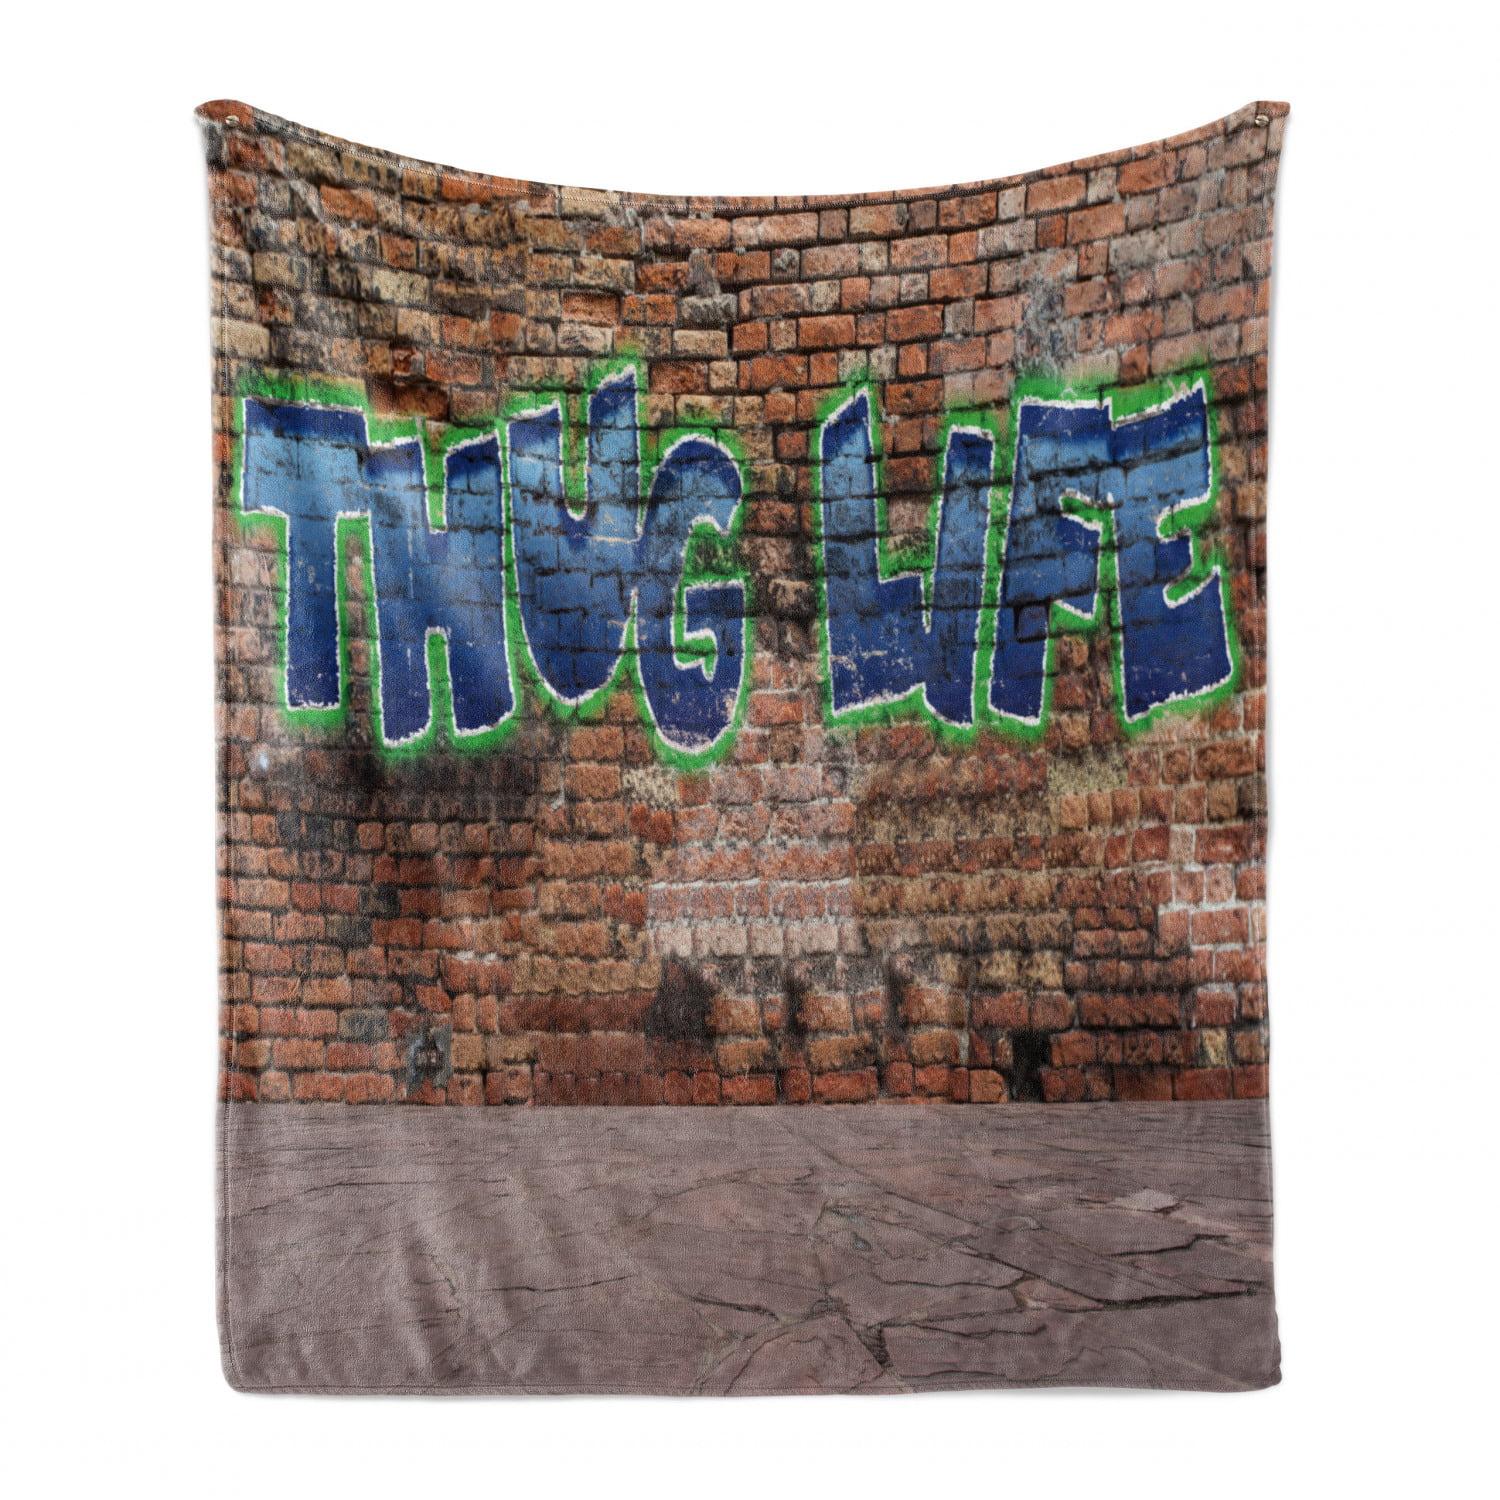 Graffiti Style Words on a Brick Wall Street Urban Art Hip Hop Rap Culture Theme Multicolor Ambesonne Thug Life Soft Flannel Fleece Throw Blanket Cozy Plush for Indoor and Outdoor Use 60 x 80 